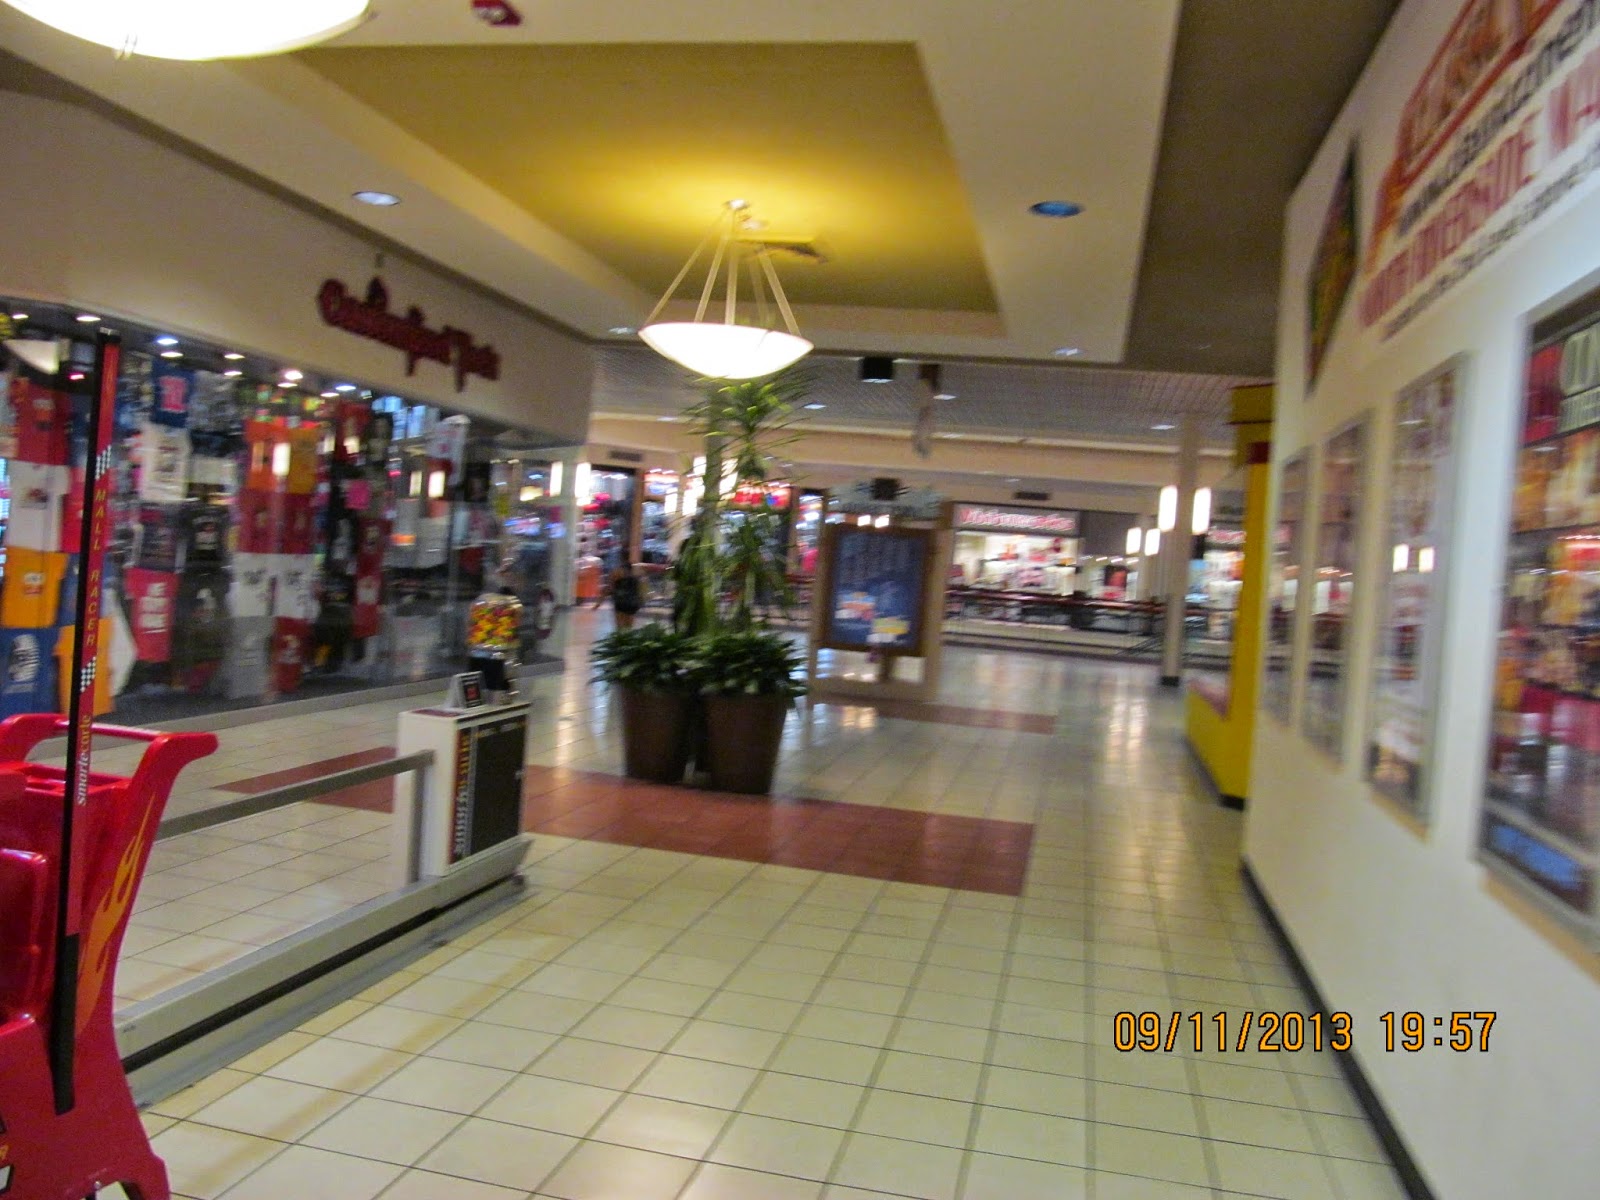 Y'all remember malls? #fyp #mall #benches #kiosks #northriverside #ill